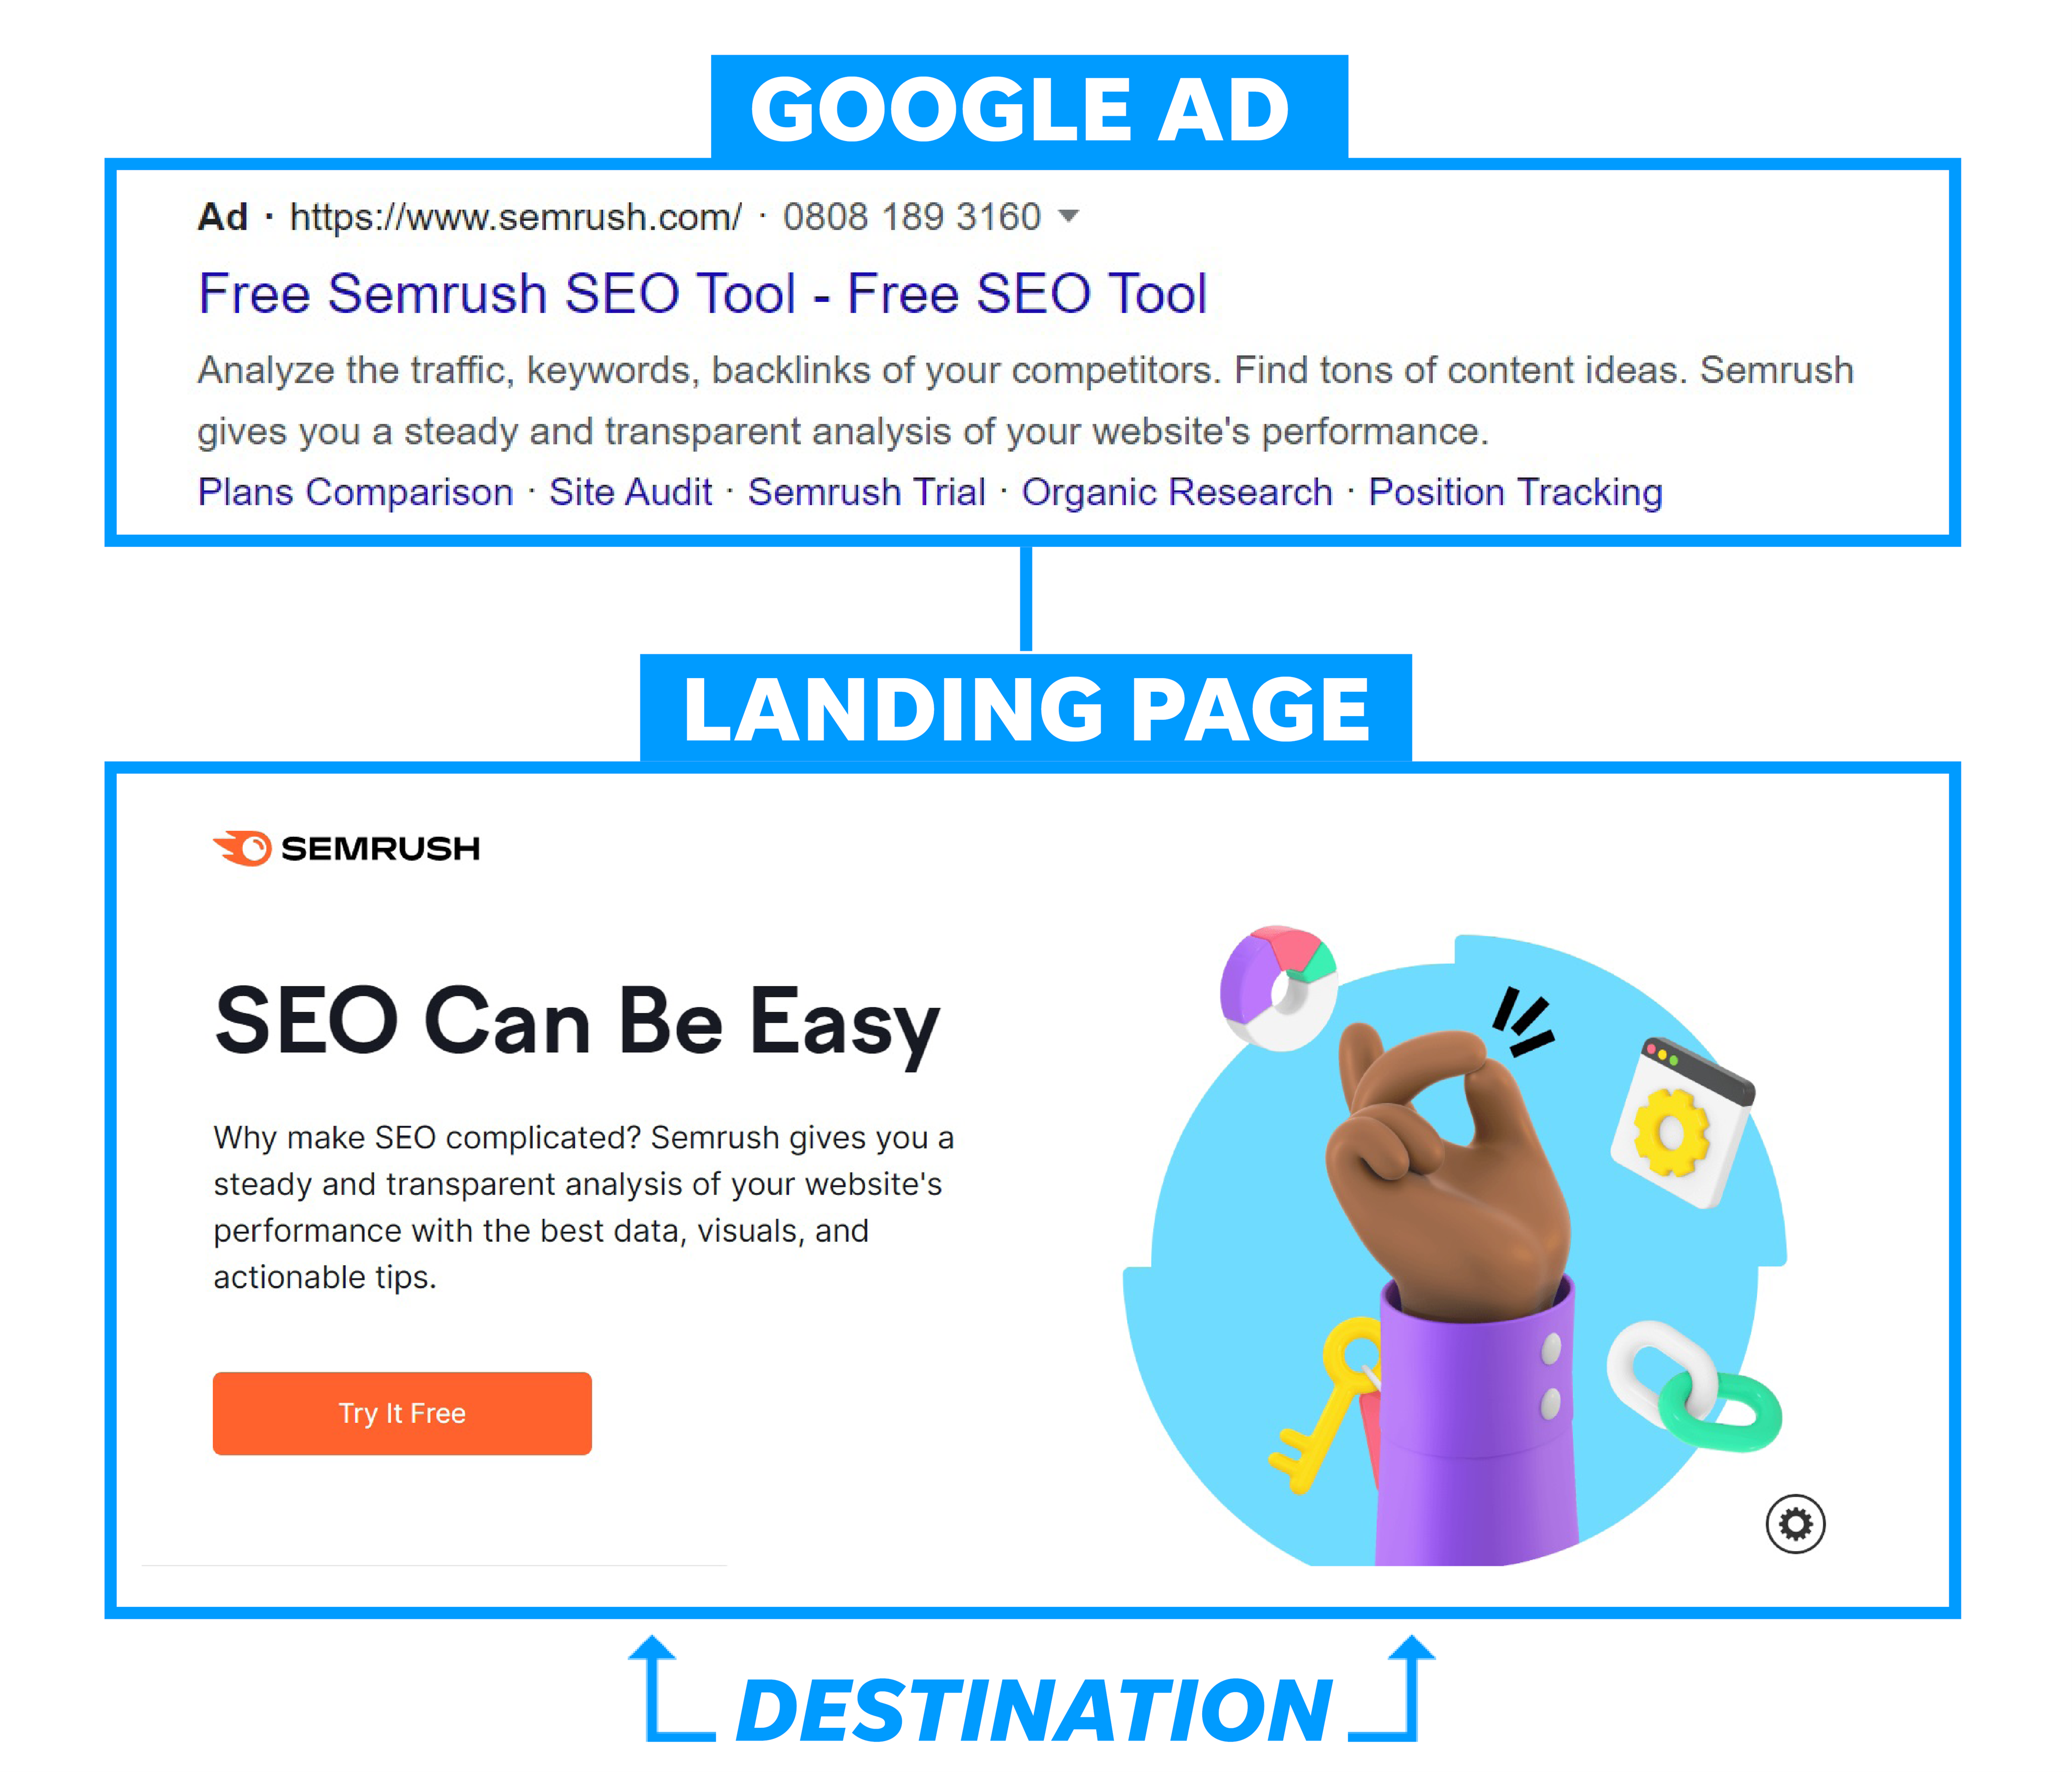 Example of a Semrush Google Ad leading the user to a destination landing page